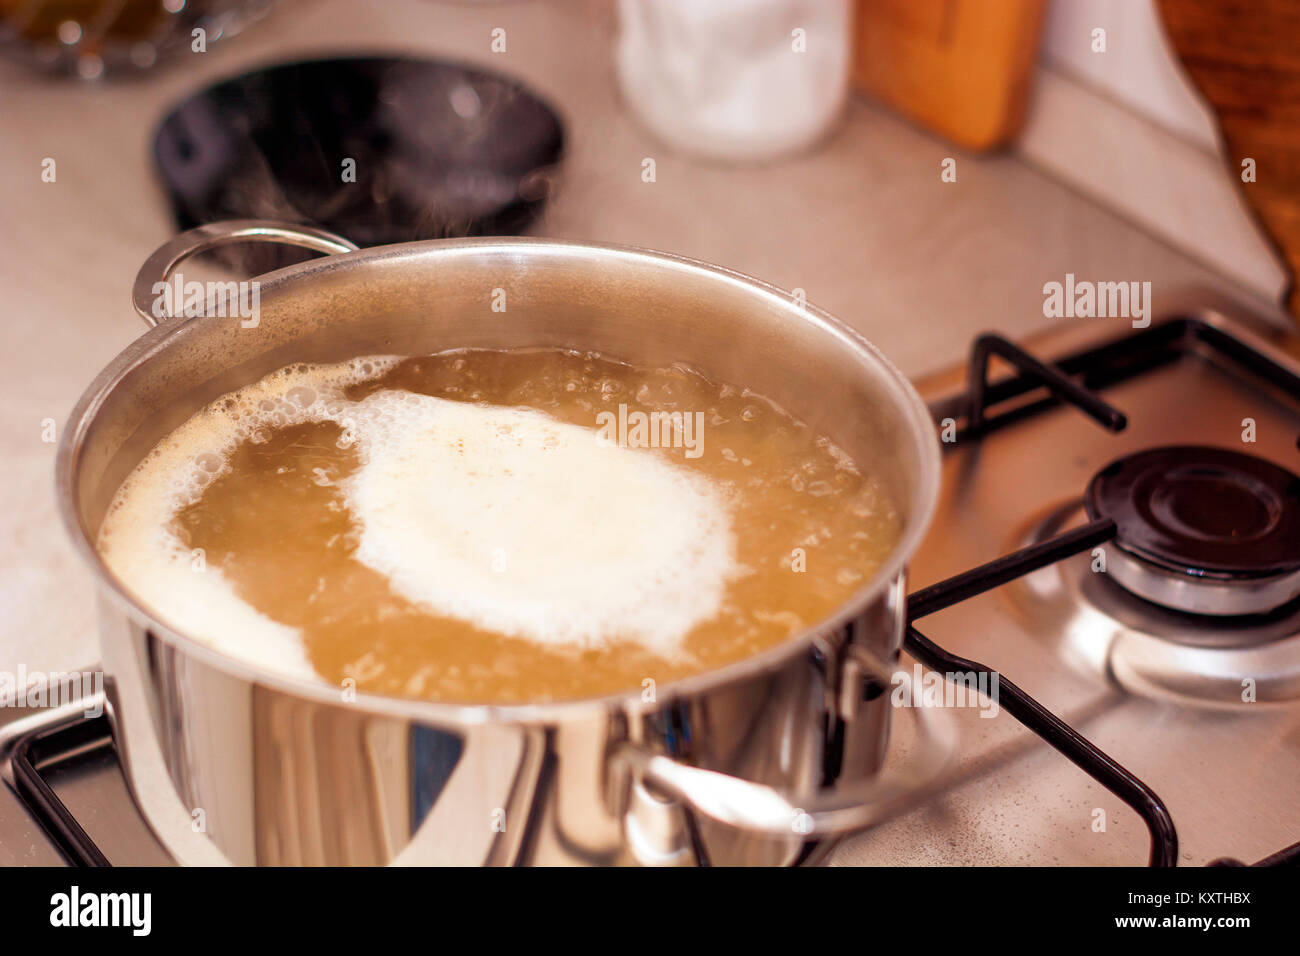 56,479 Boiling Pot Water Royalty-Free Images, Stock Photos